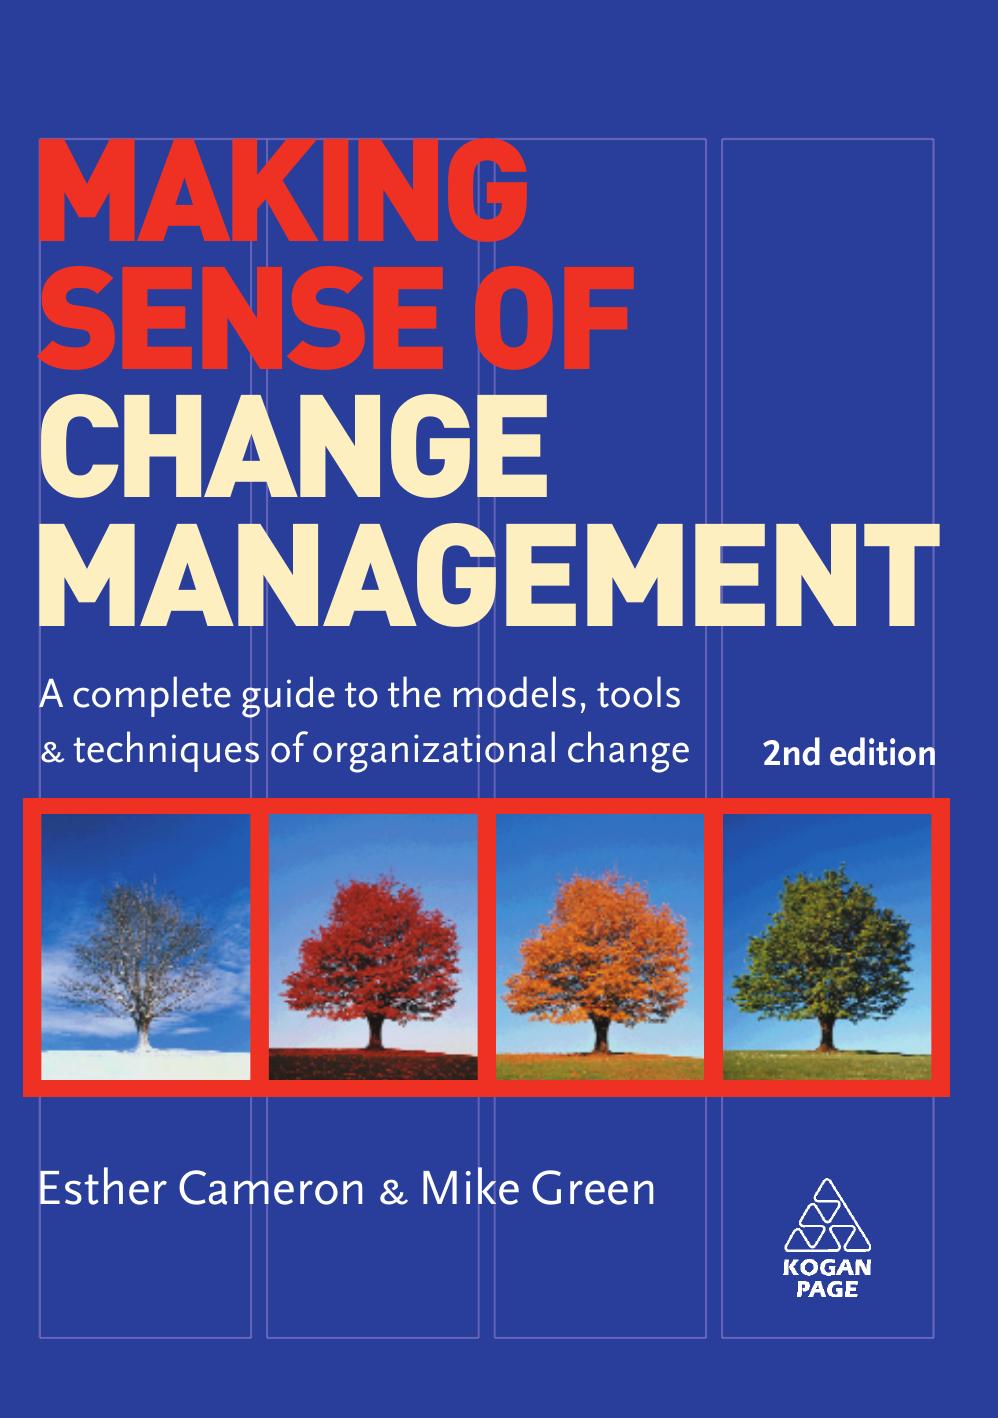 Making Sense of Change Management: A Complete Guide to the Models, Tools & Techniques of Organizational Change